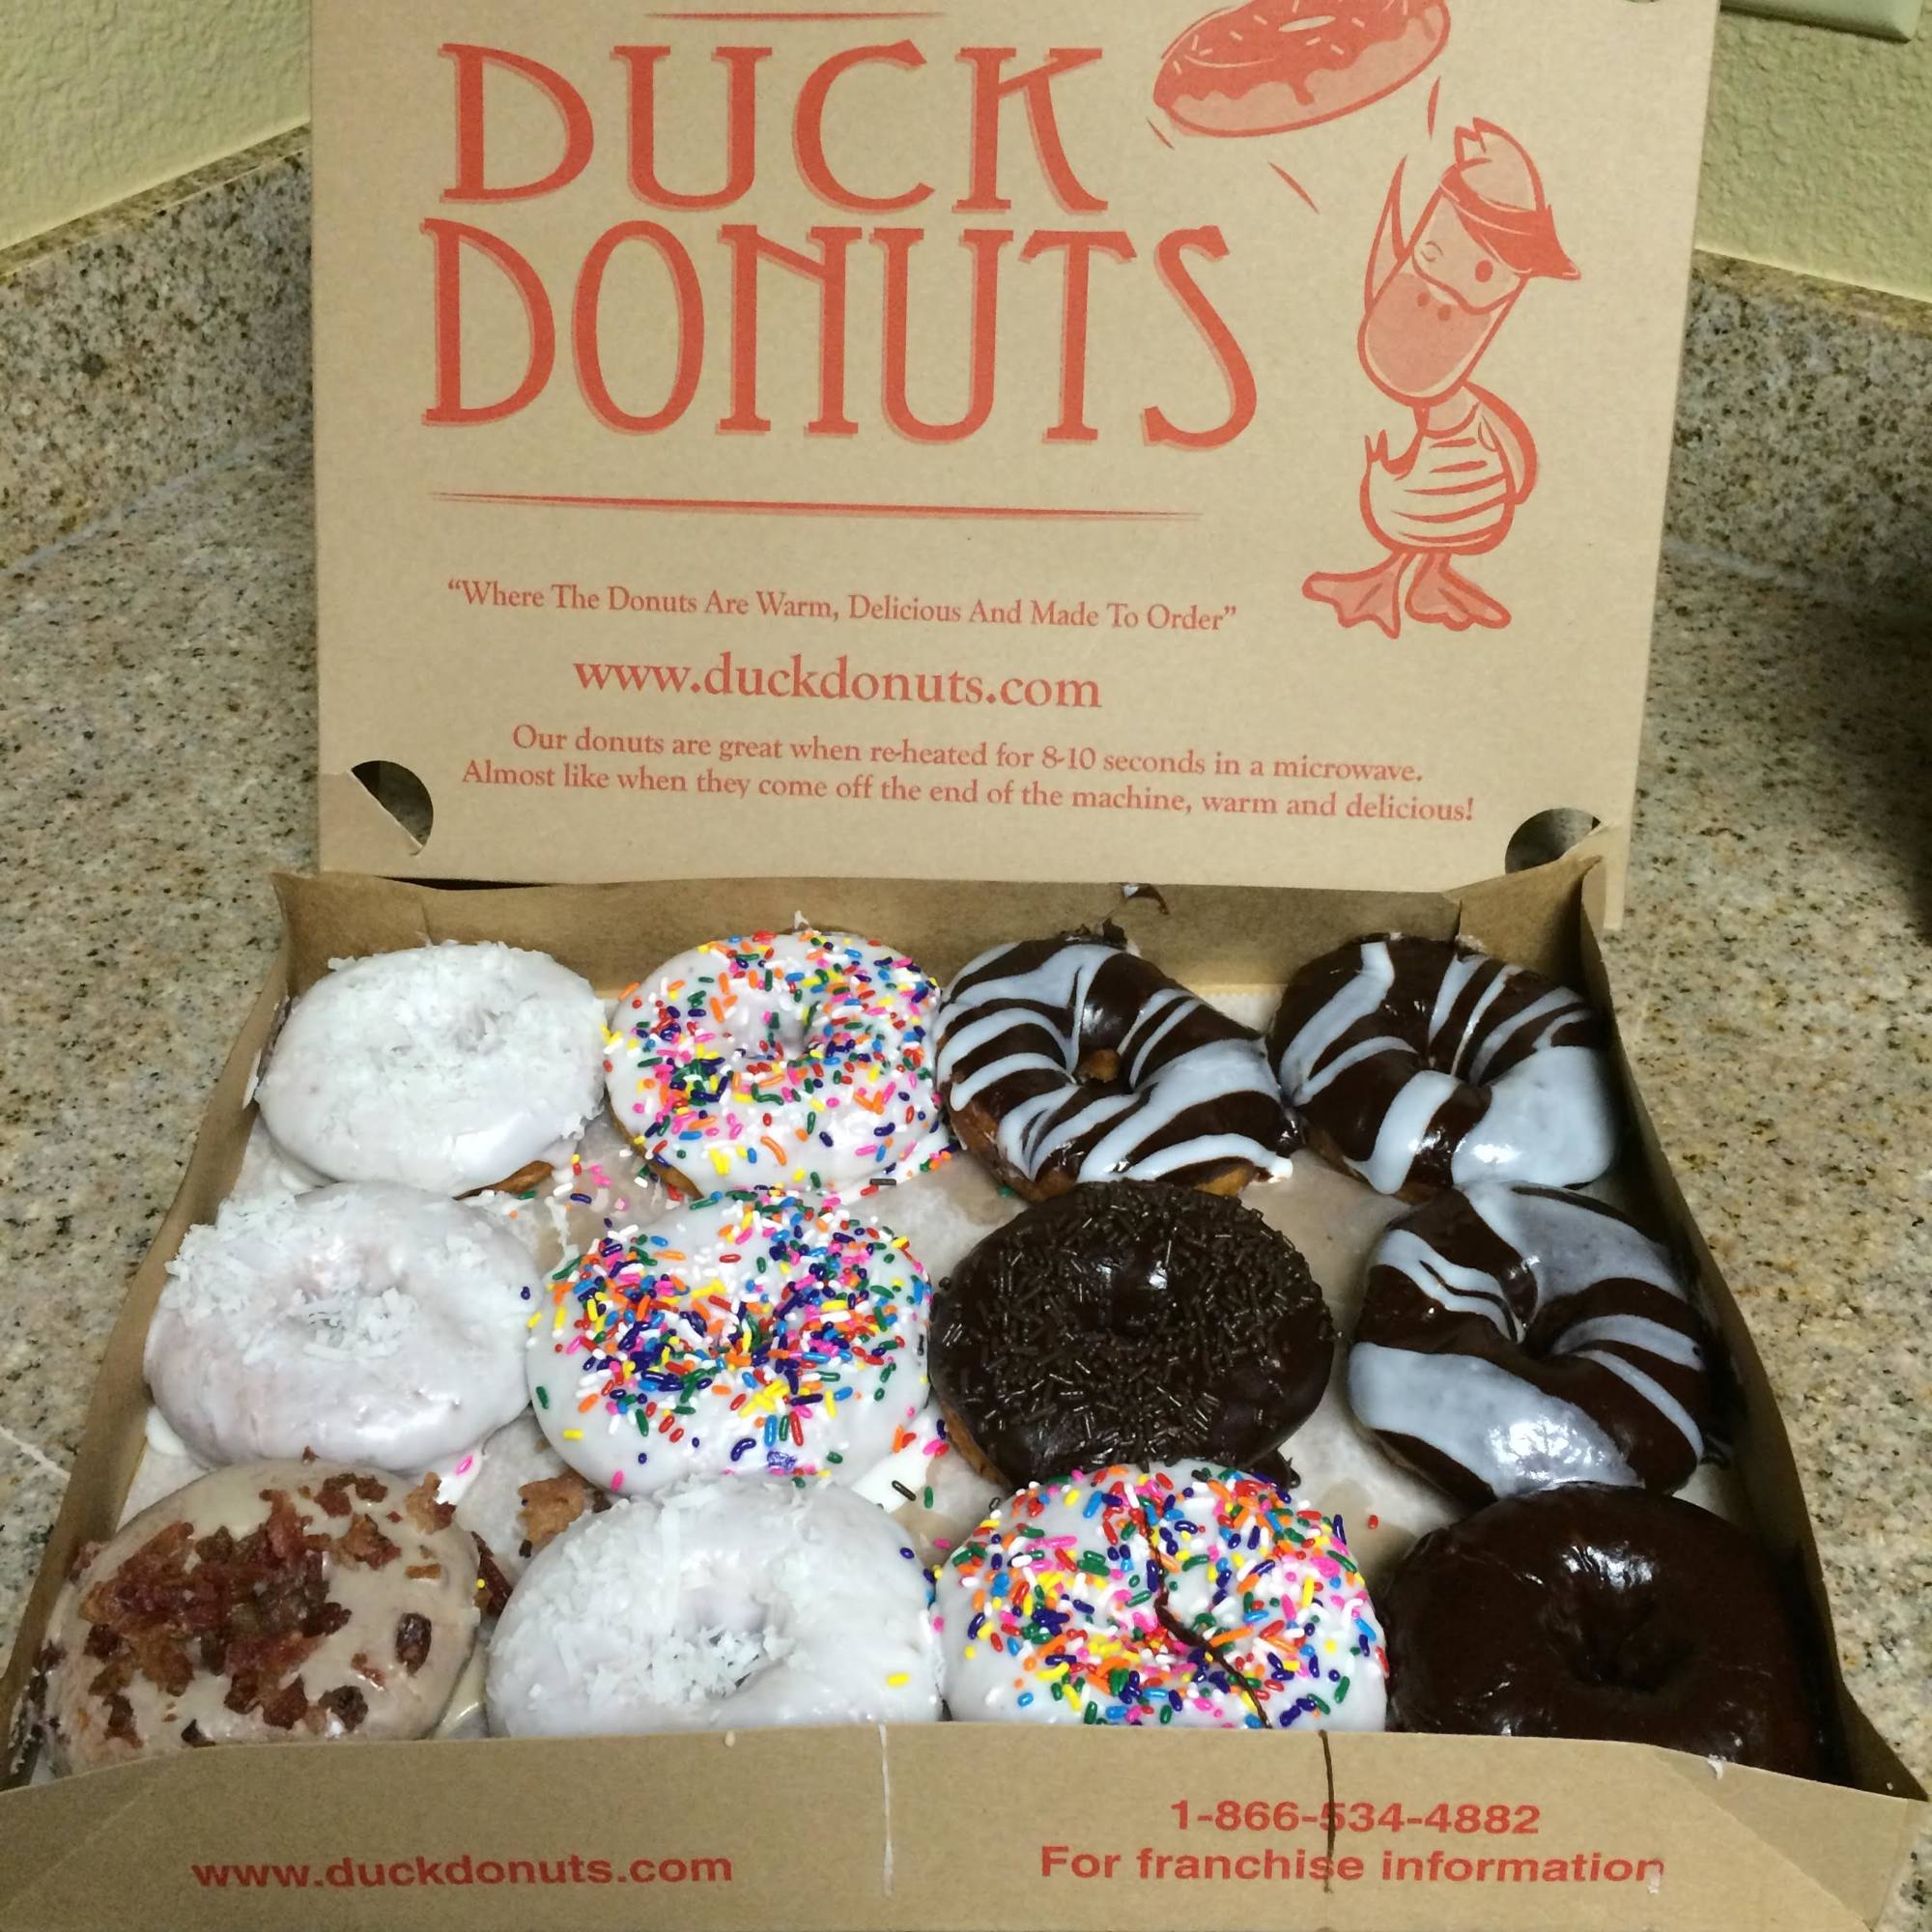 Duck Donuts allows customers to create their own combination of coatings, toppings and drizzles.